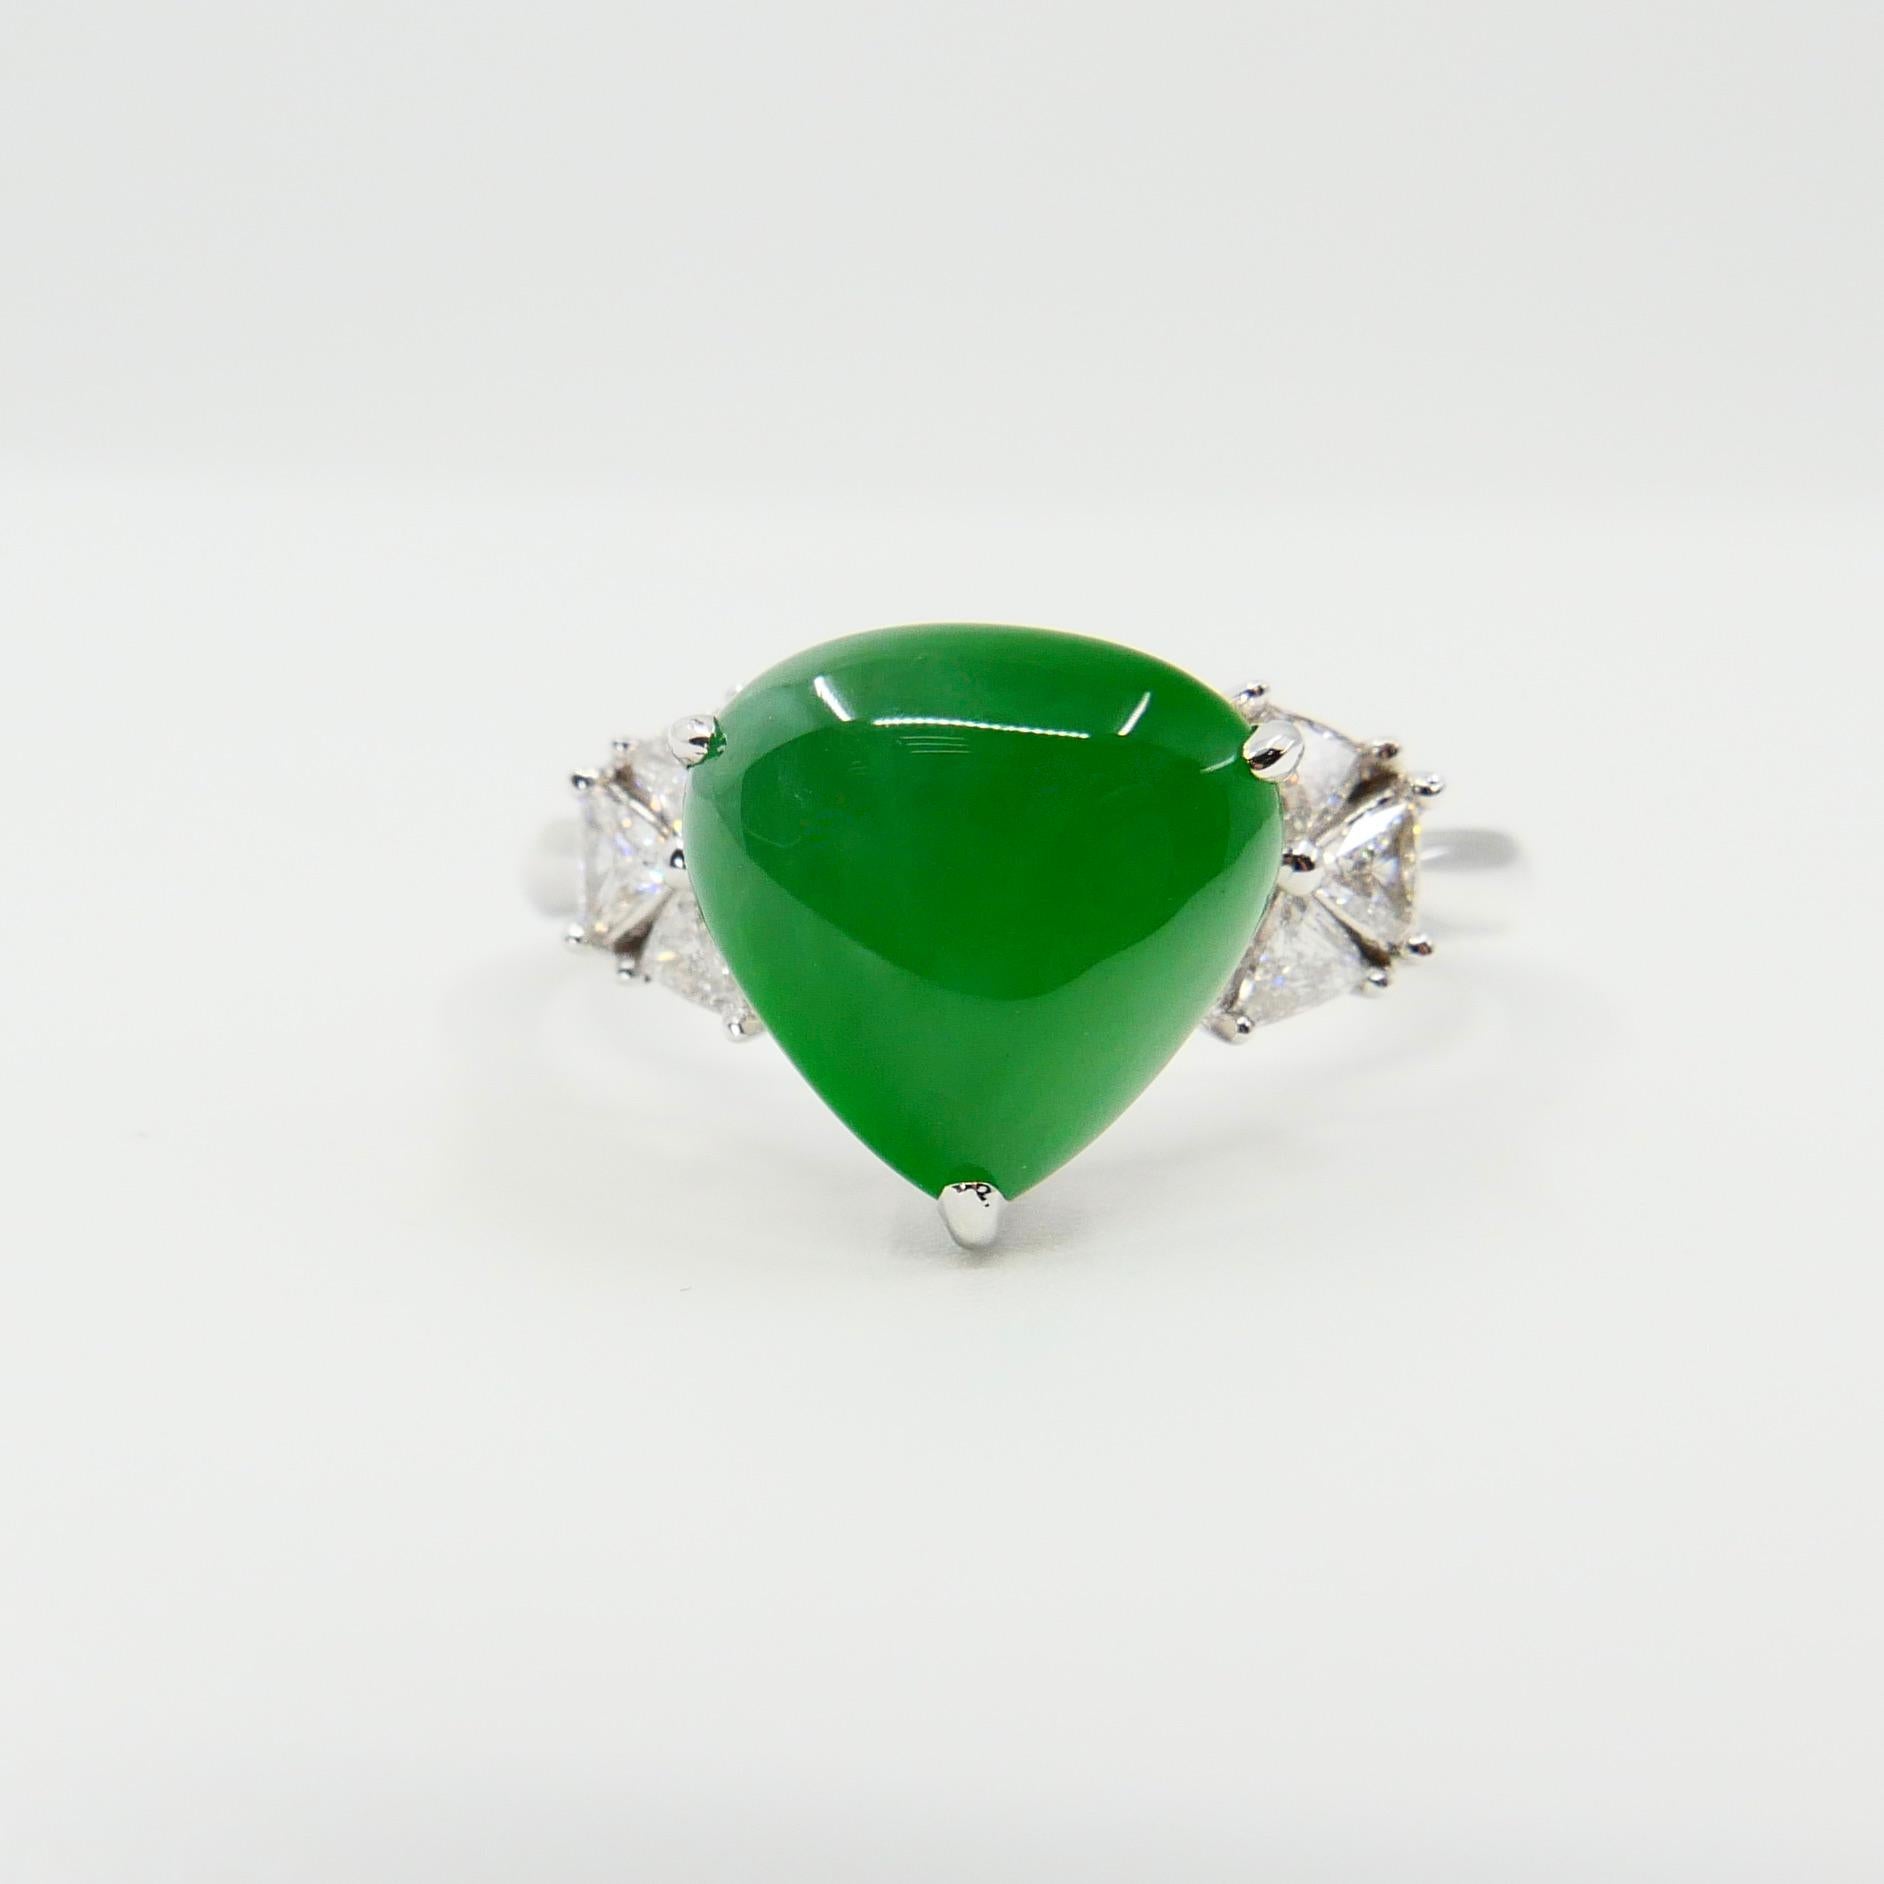 Certified Natural Type A Jadeite Jade & Diamond Cocktail Ring, Apple Green Color 3